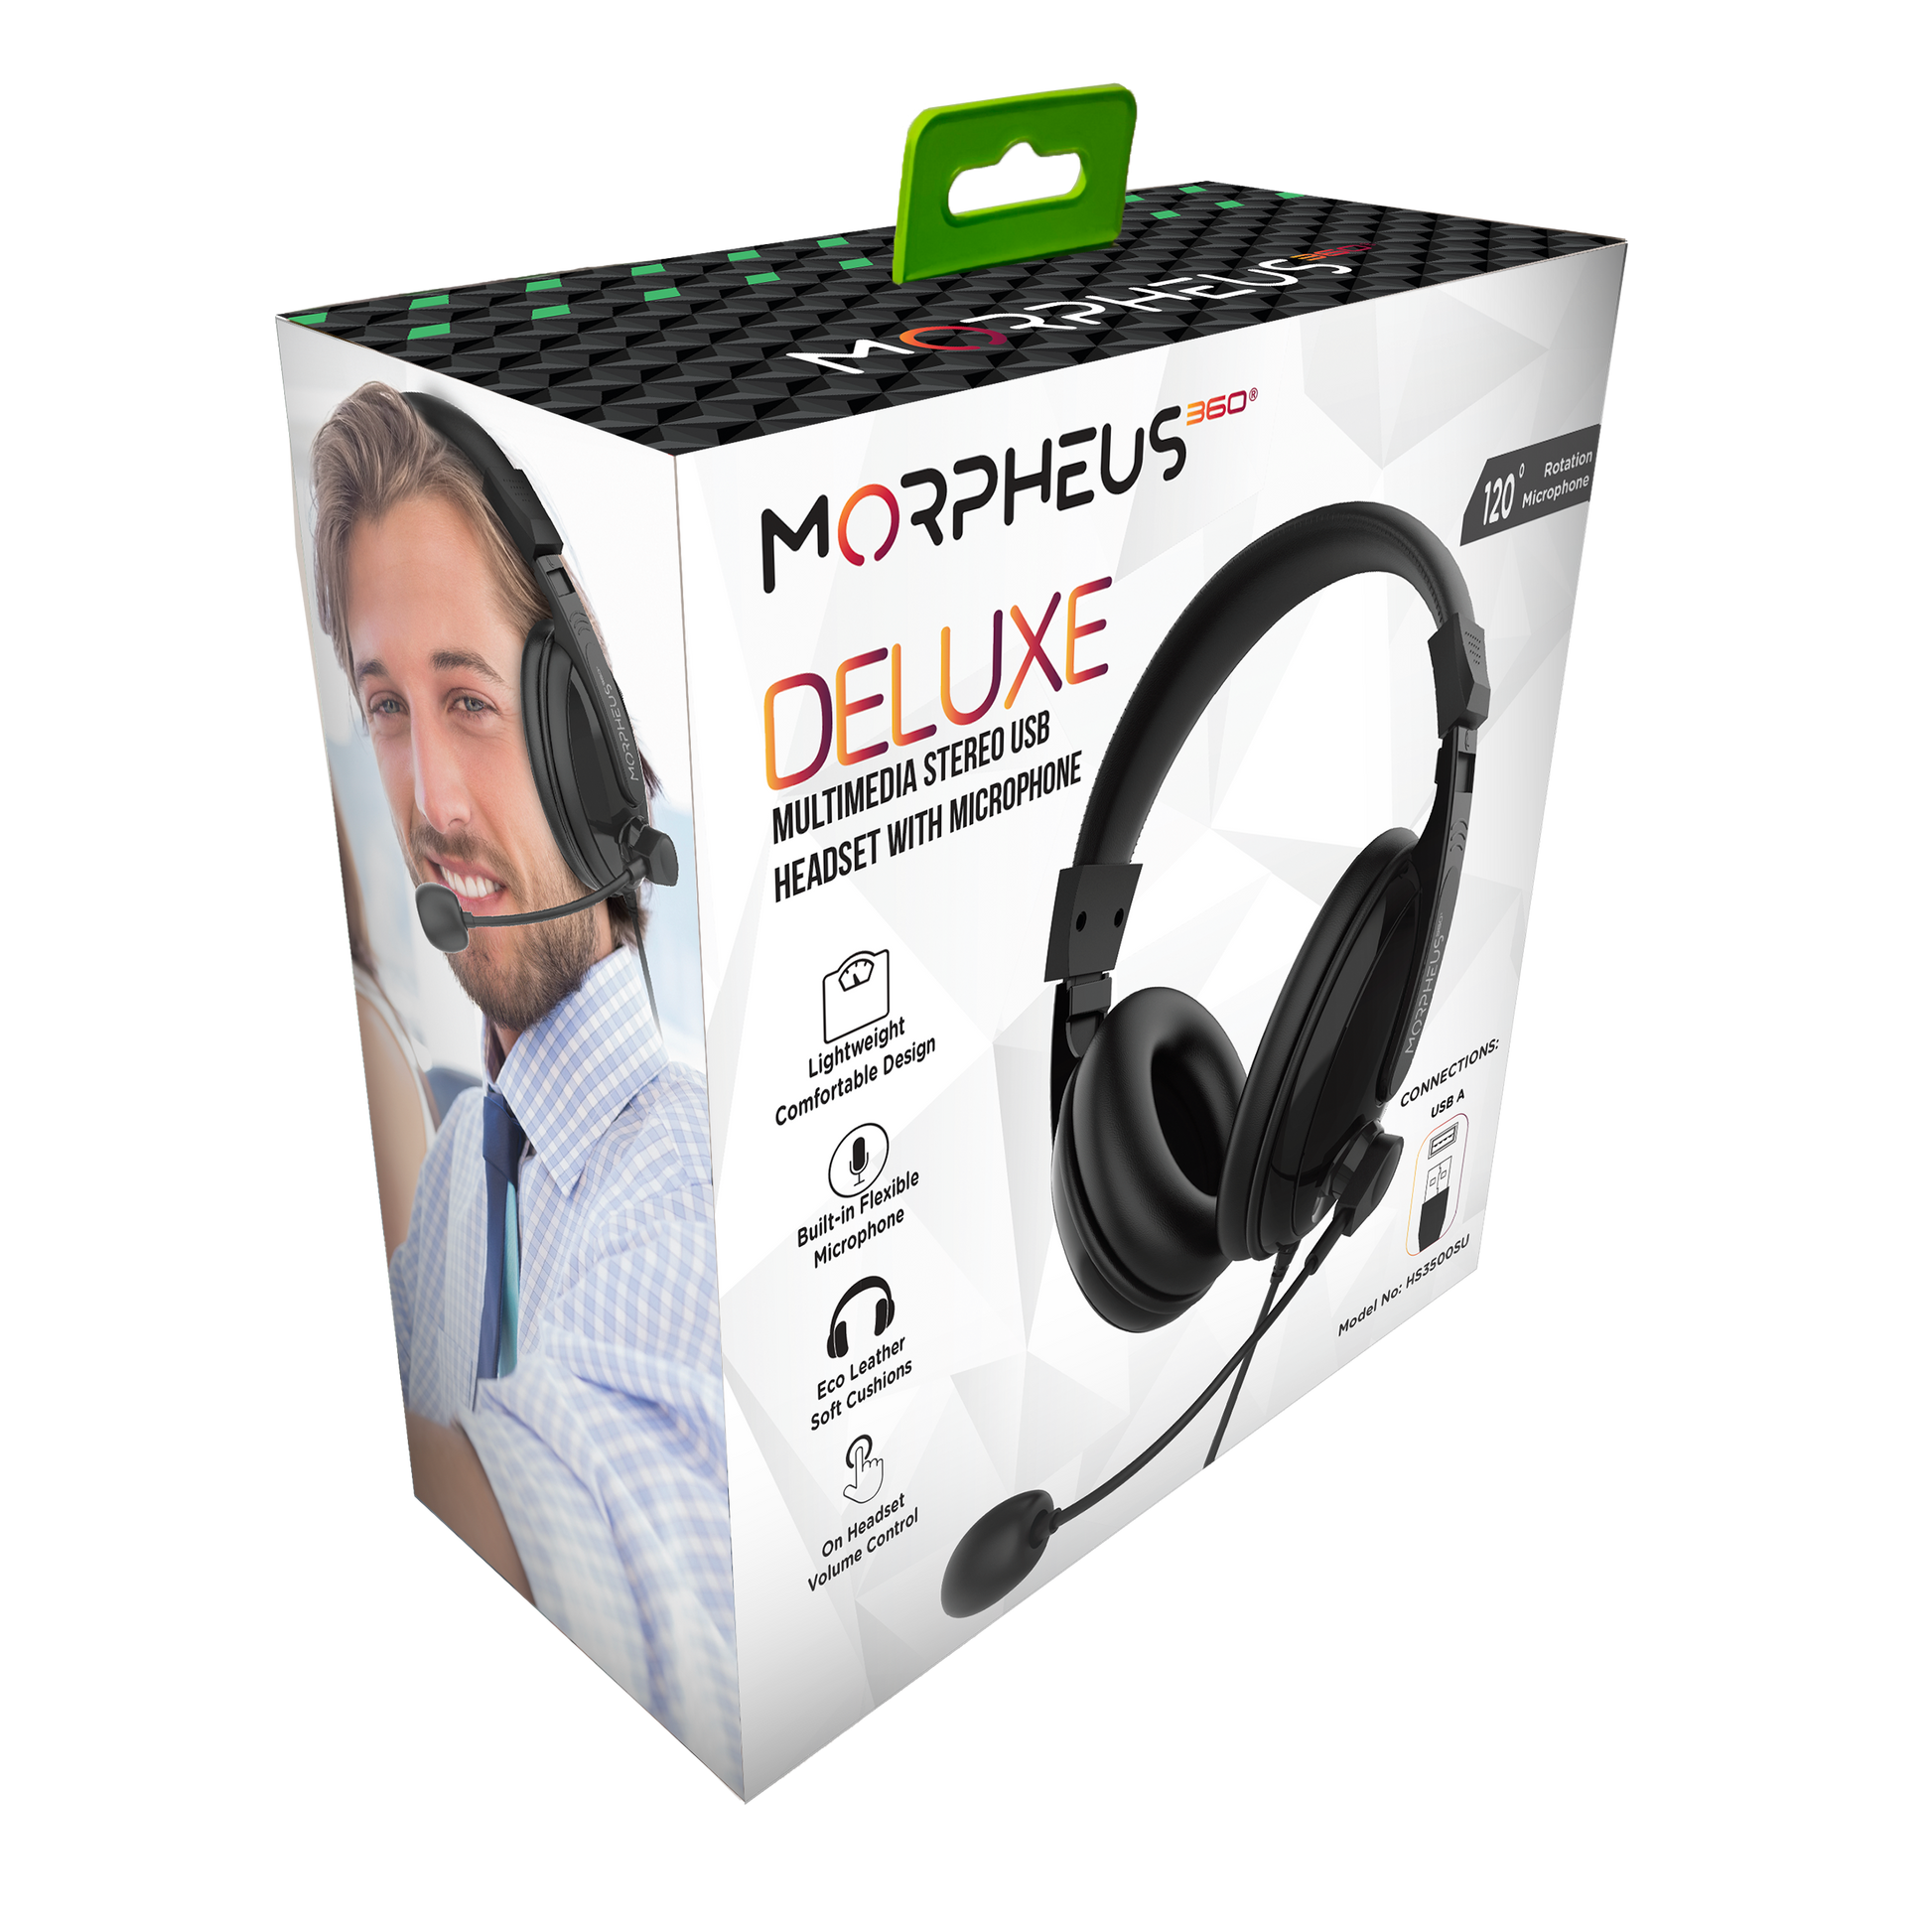 Front angled view of the Morpheus 360 Model HS3500SU Deluxe Multimedia Headset with Boom Microphone Retail Package.